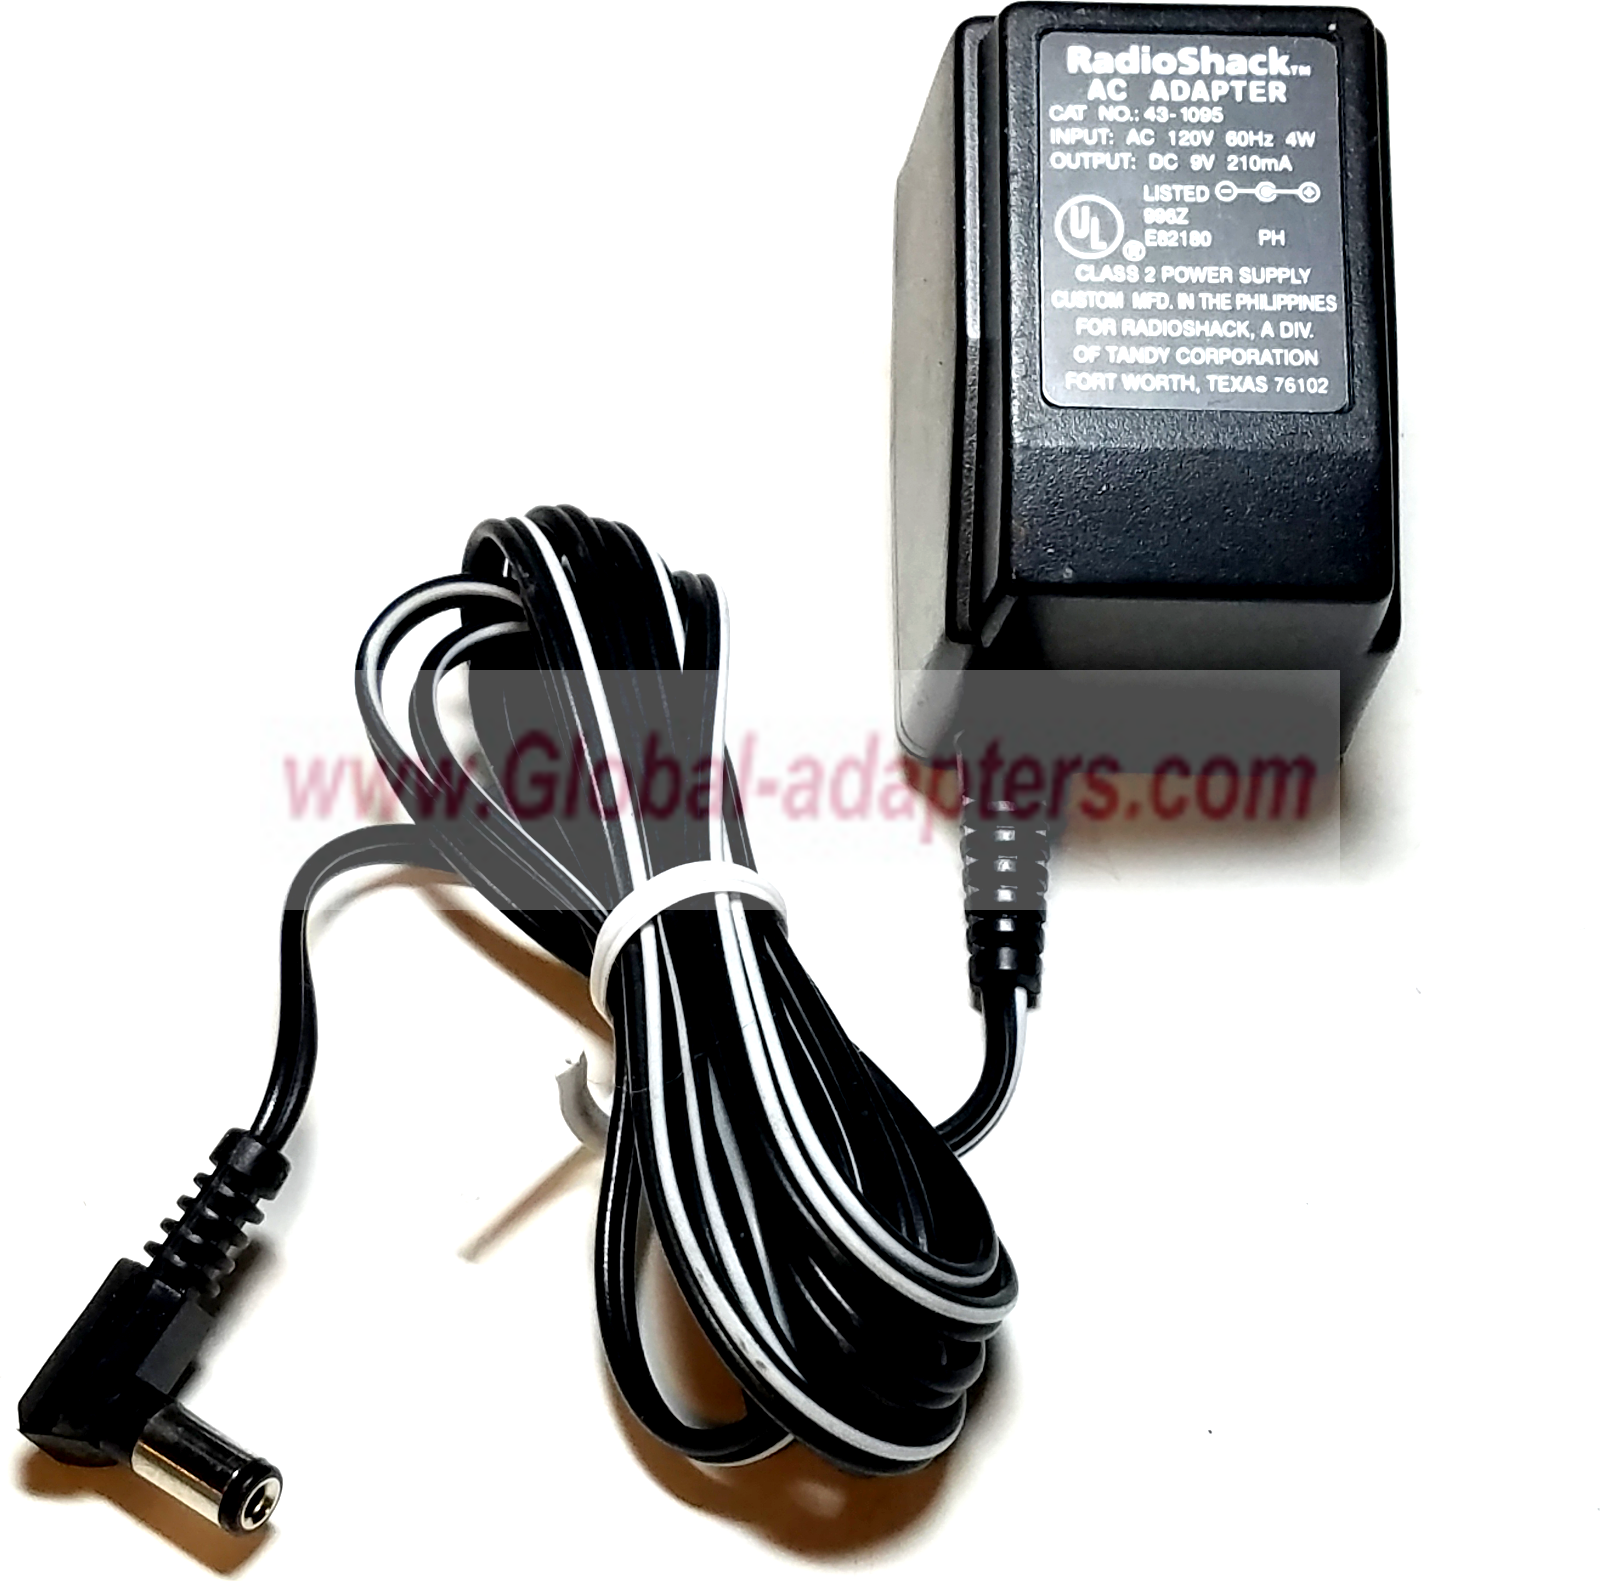 New 9V 210mA Radio Shack 43-1095 Class 2 Power Supply AC Adapter Charger - Click Image to Close